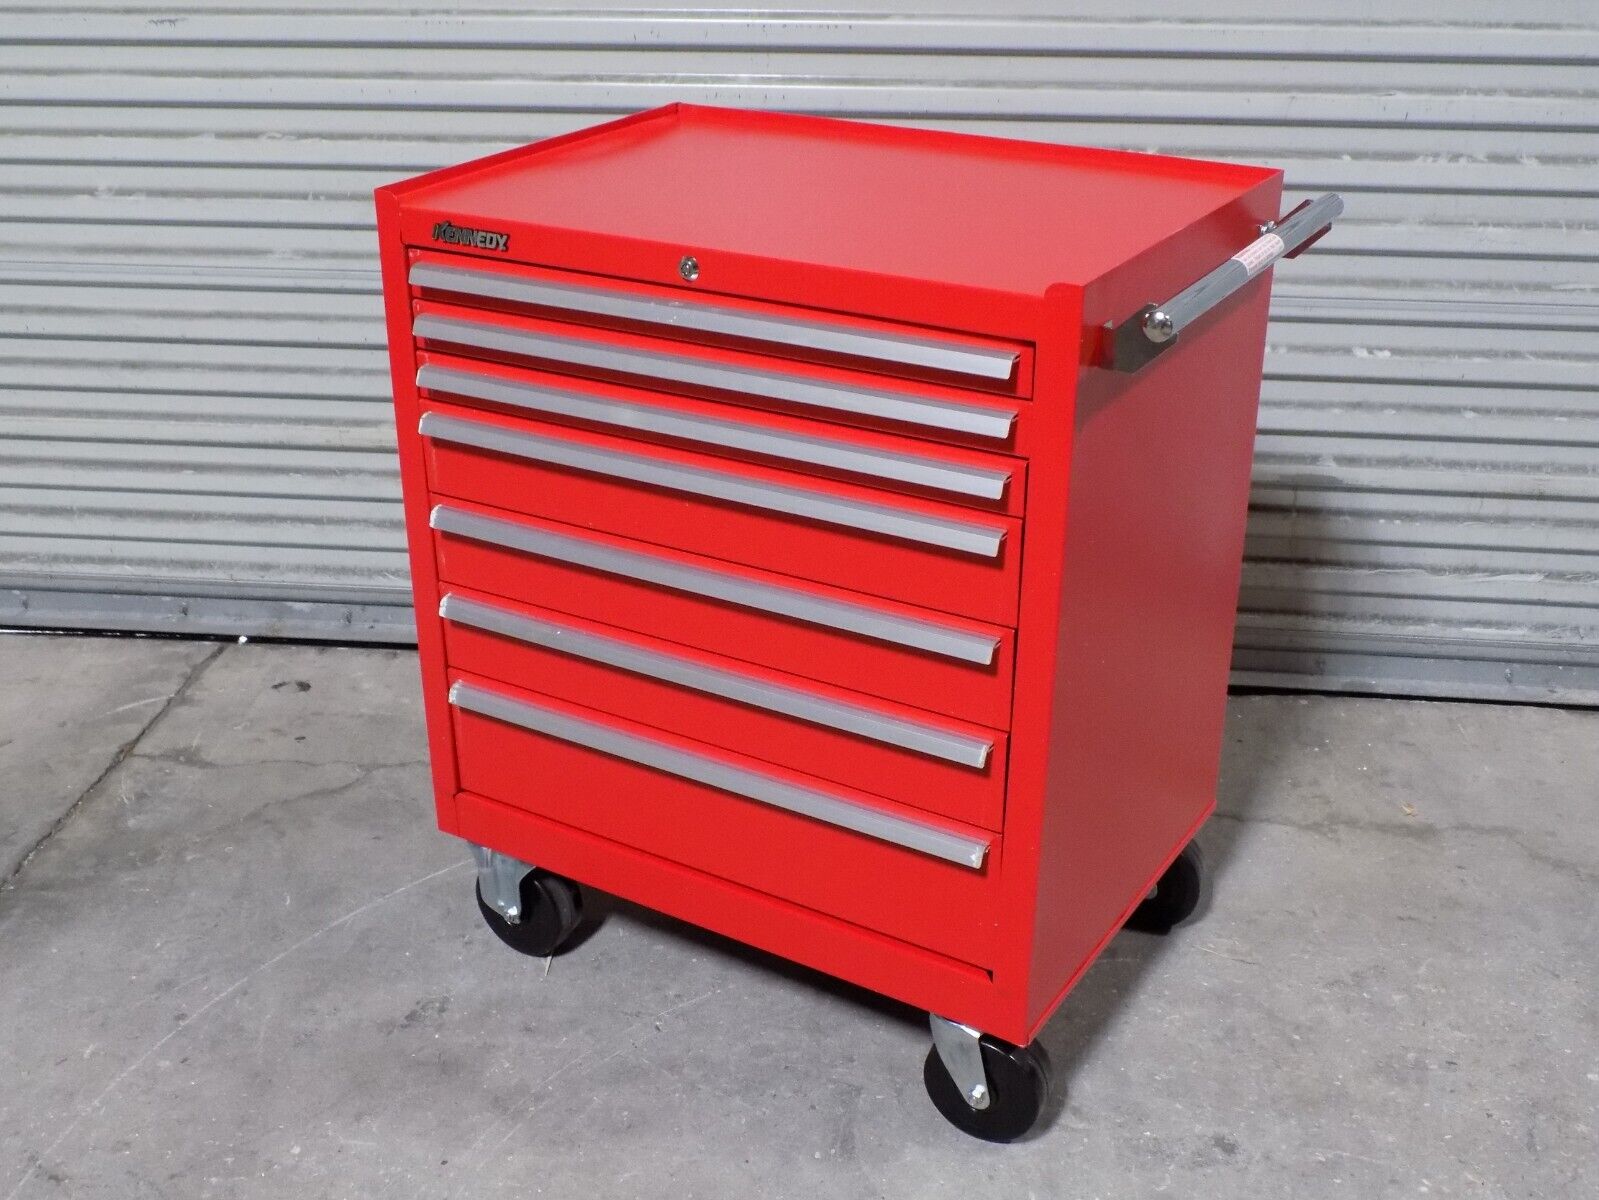 Kennedy Red Drawer Roller Cabinet, 27W X 18D X 35H 277XR 99-010-278, Kennedy  Drawer Rolling Tool Chest